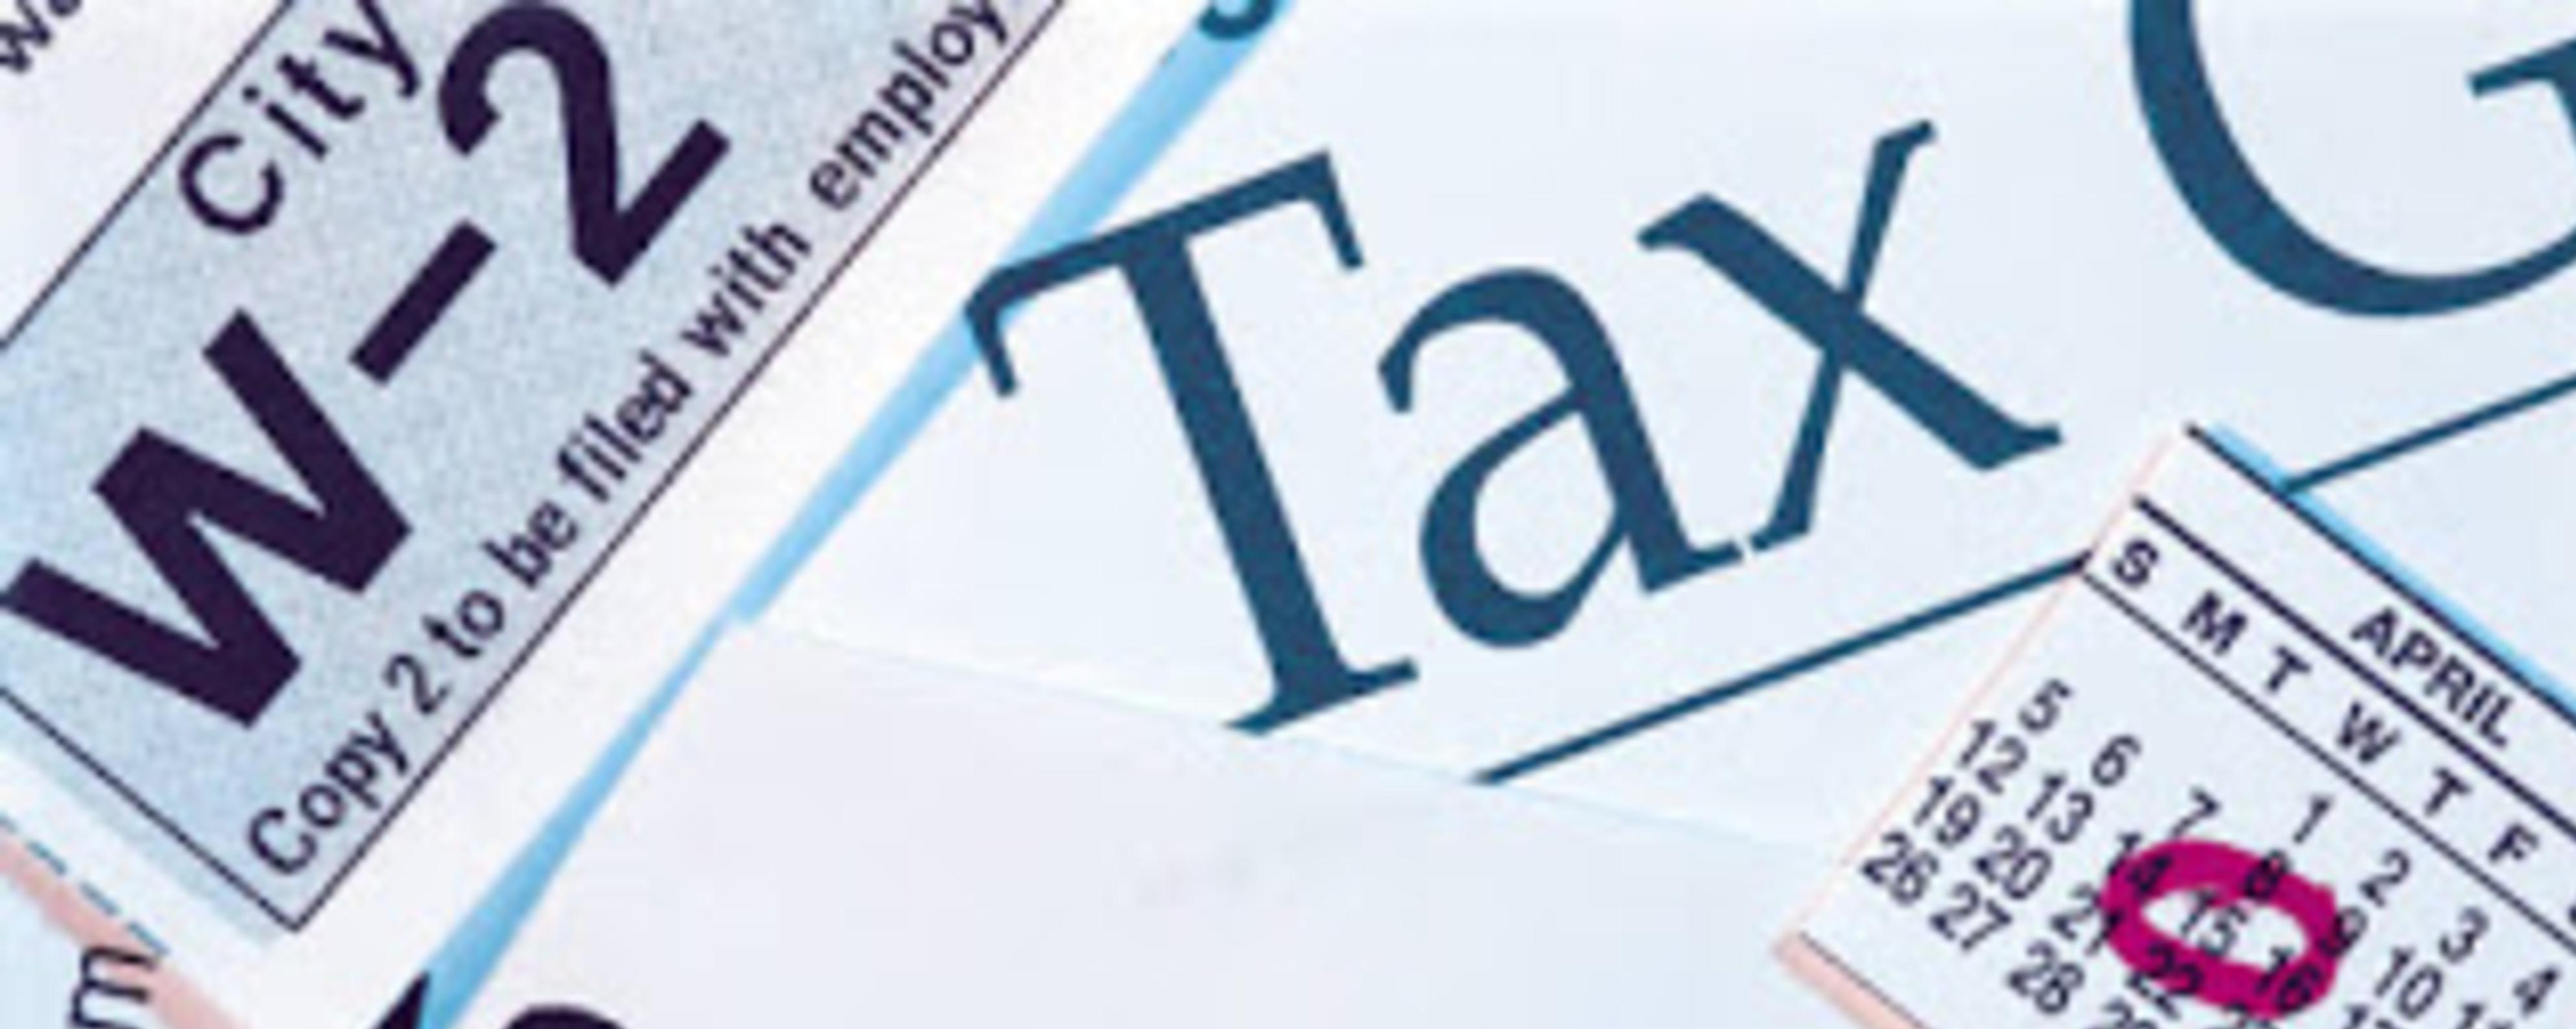 income-tax-refund-now-quickly-check-your-tax-refund-status-in-simple